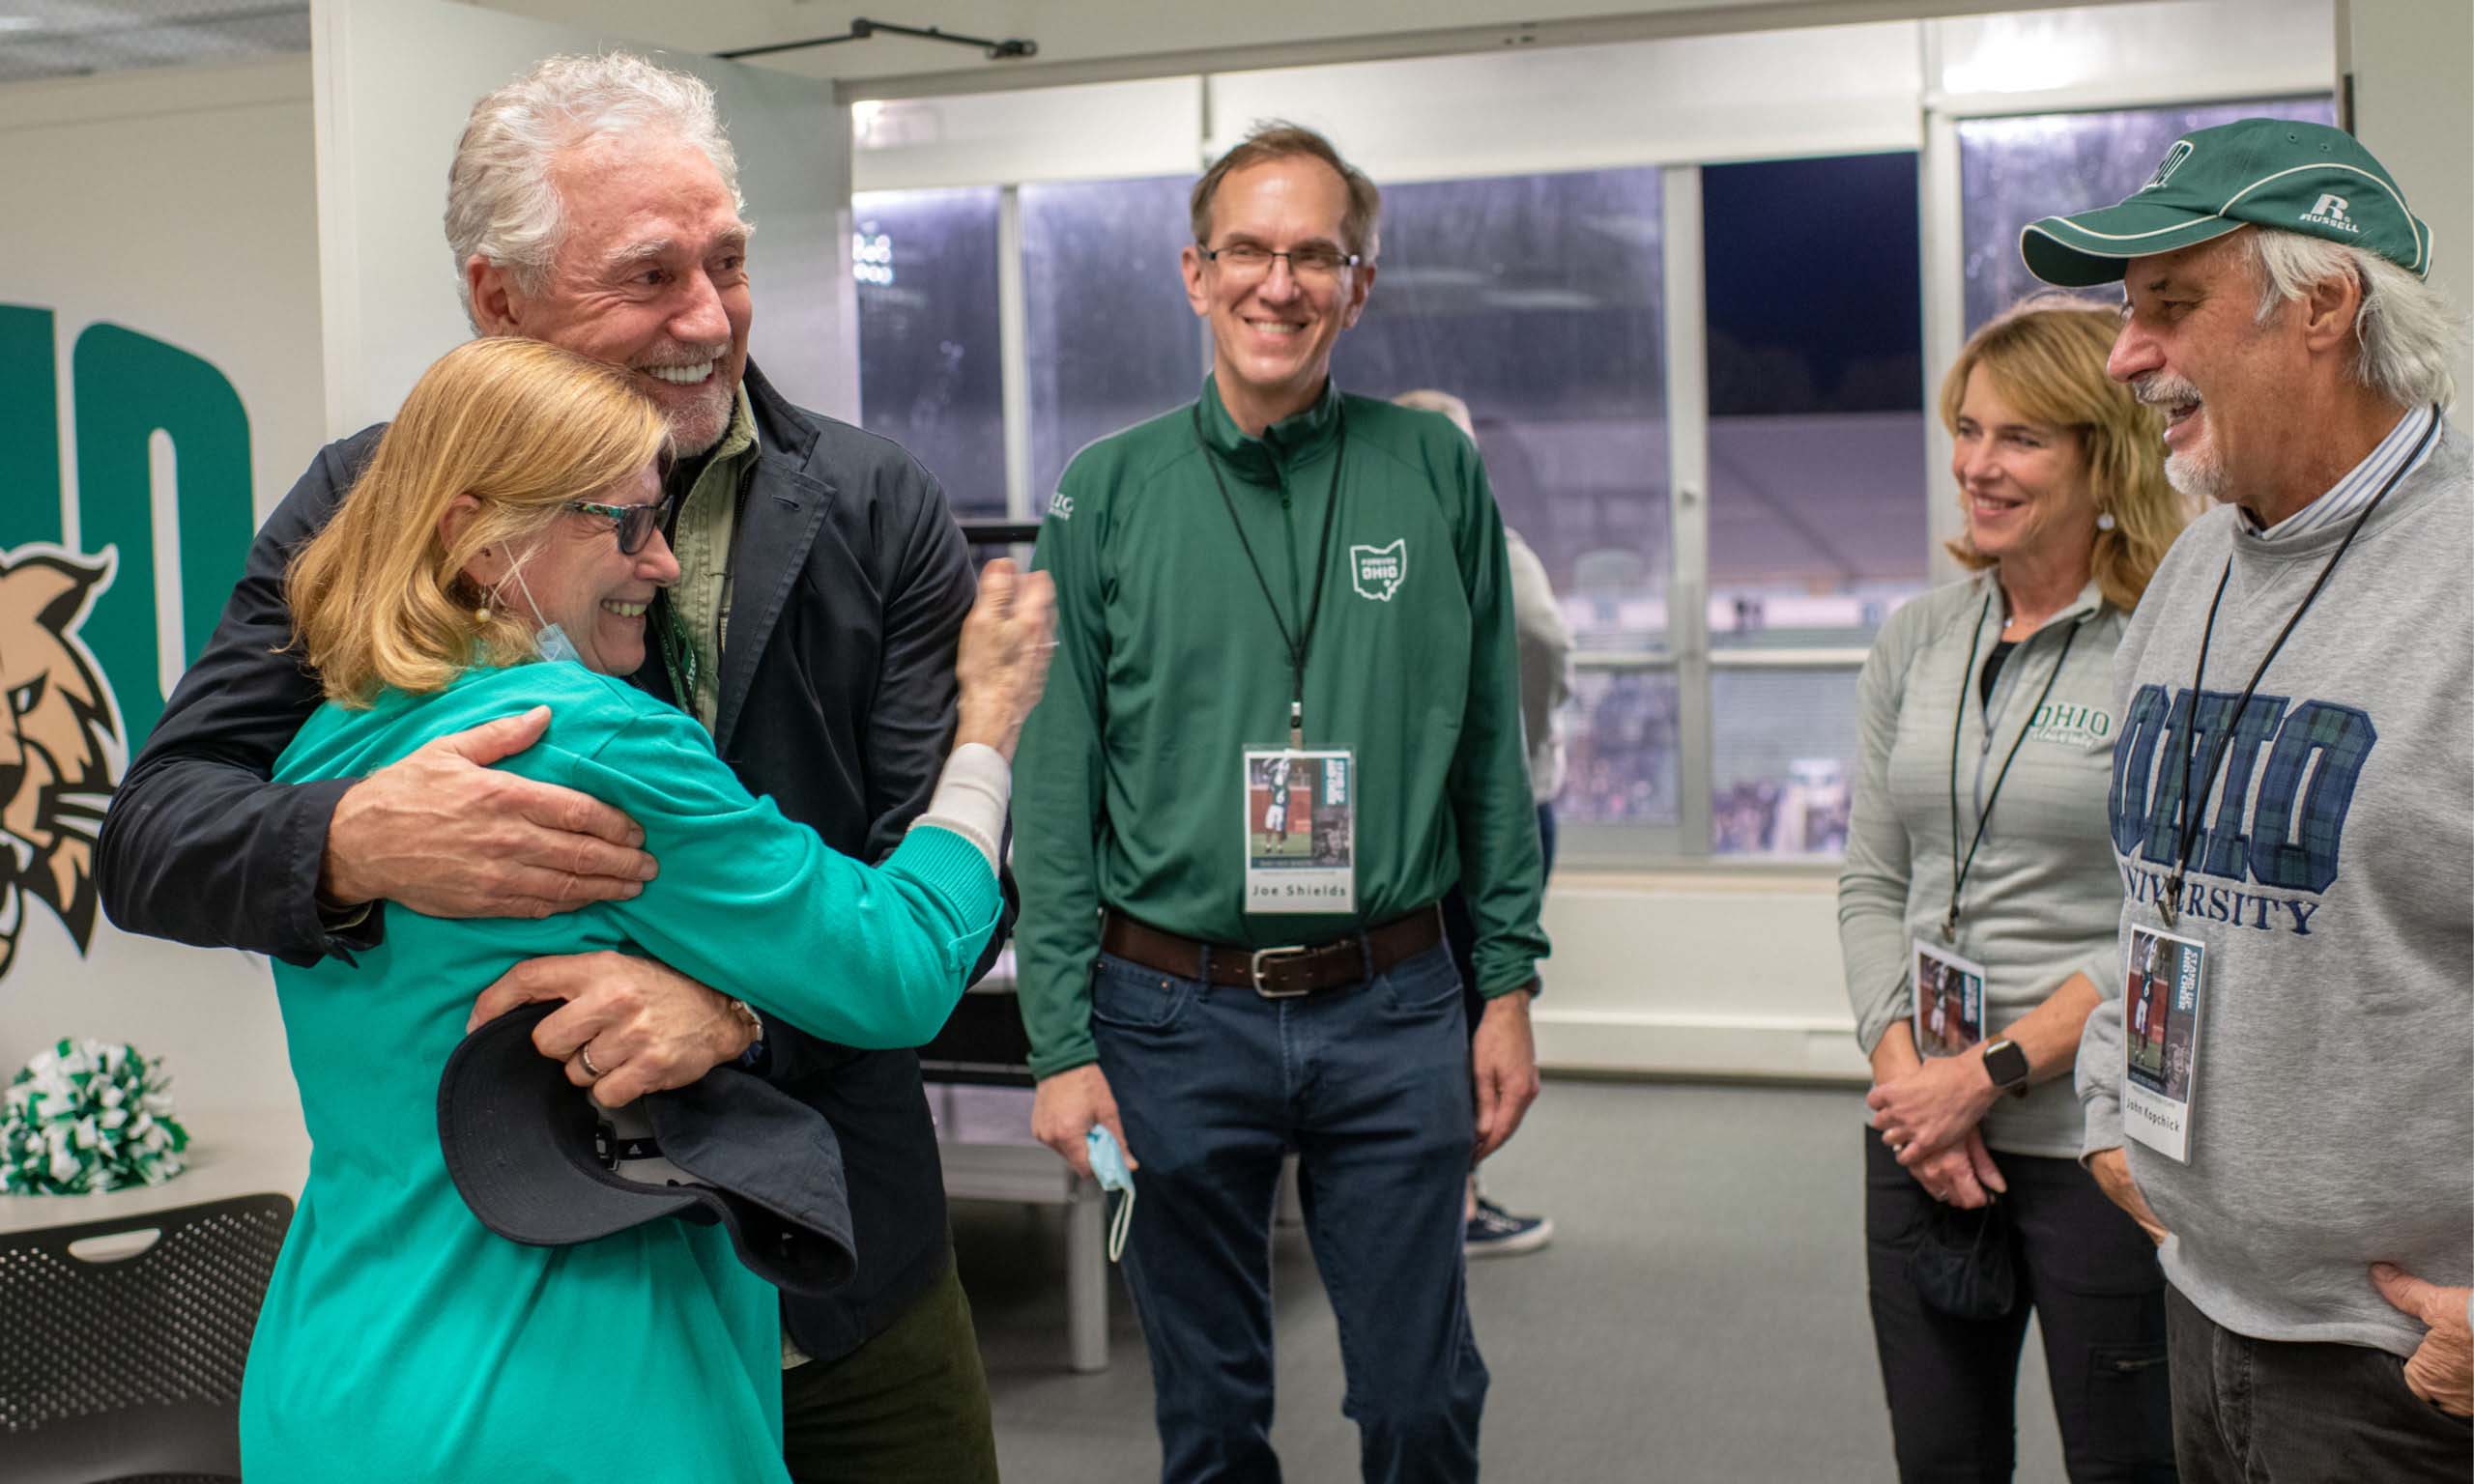 Rick Hawkins’ Nov. 2 return to campus just happened to fall on Dr. John Kopchick’s 70th birthday. They ended the day by attending the OHIO Football game, with Hawkins, a former Bobcat football player himself, pictured here hugging Char Kopchick while (from left) Drs. Joseph Shields, Darlene Berryman and John Kopchick look on. 